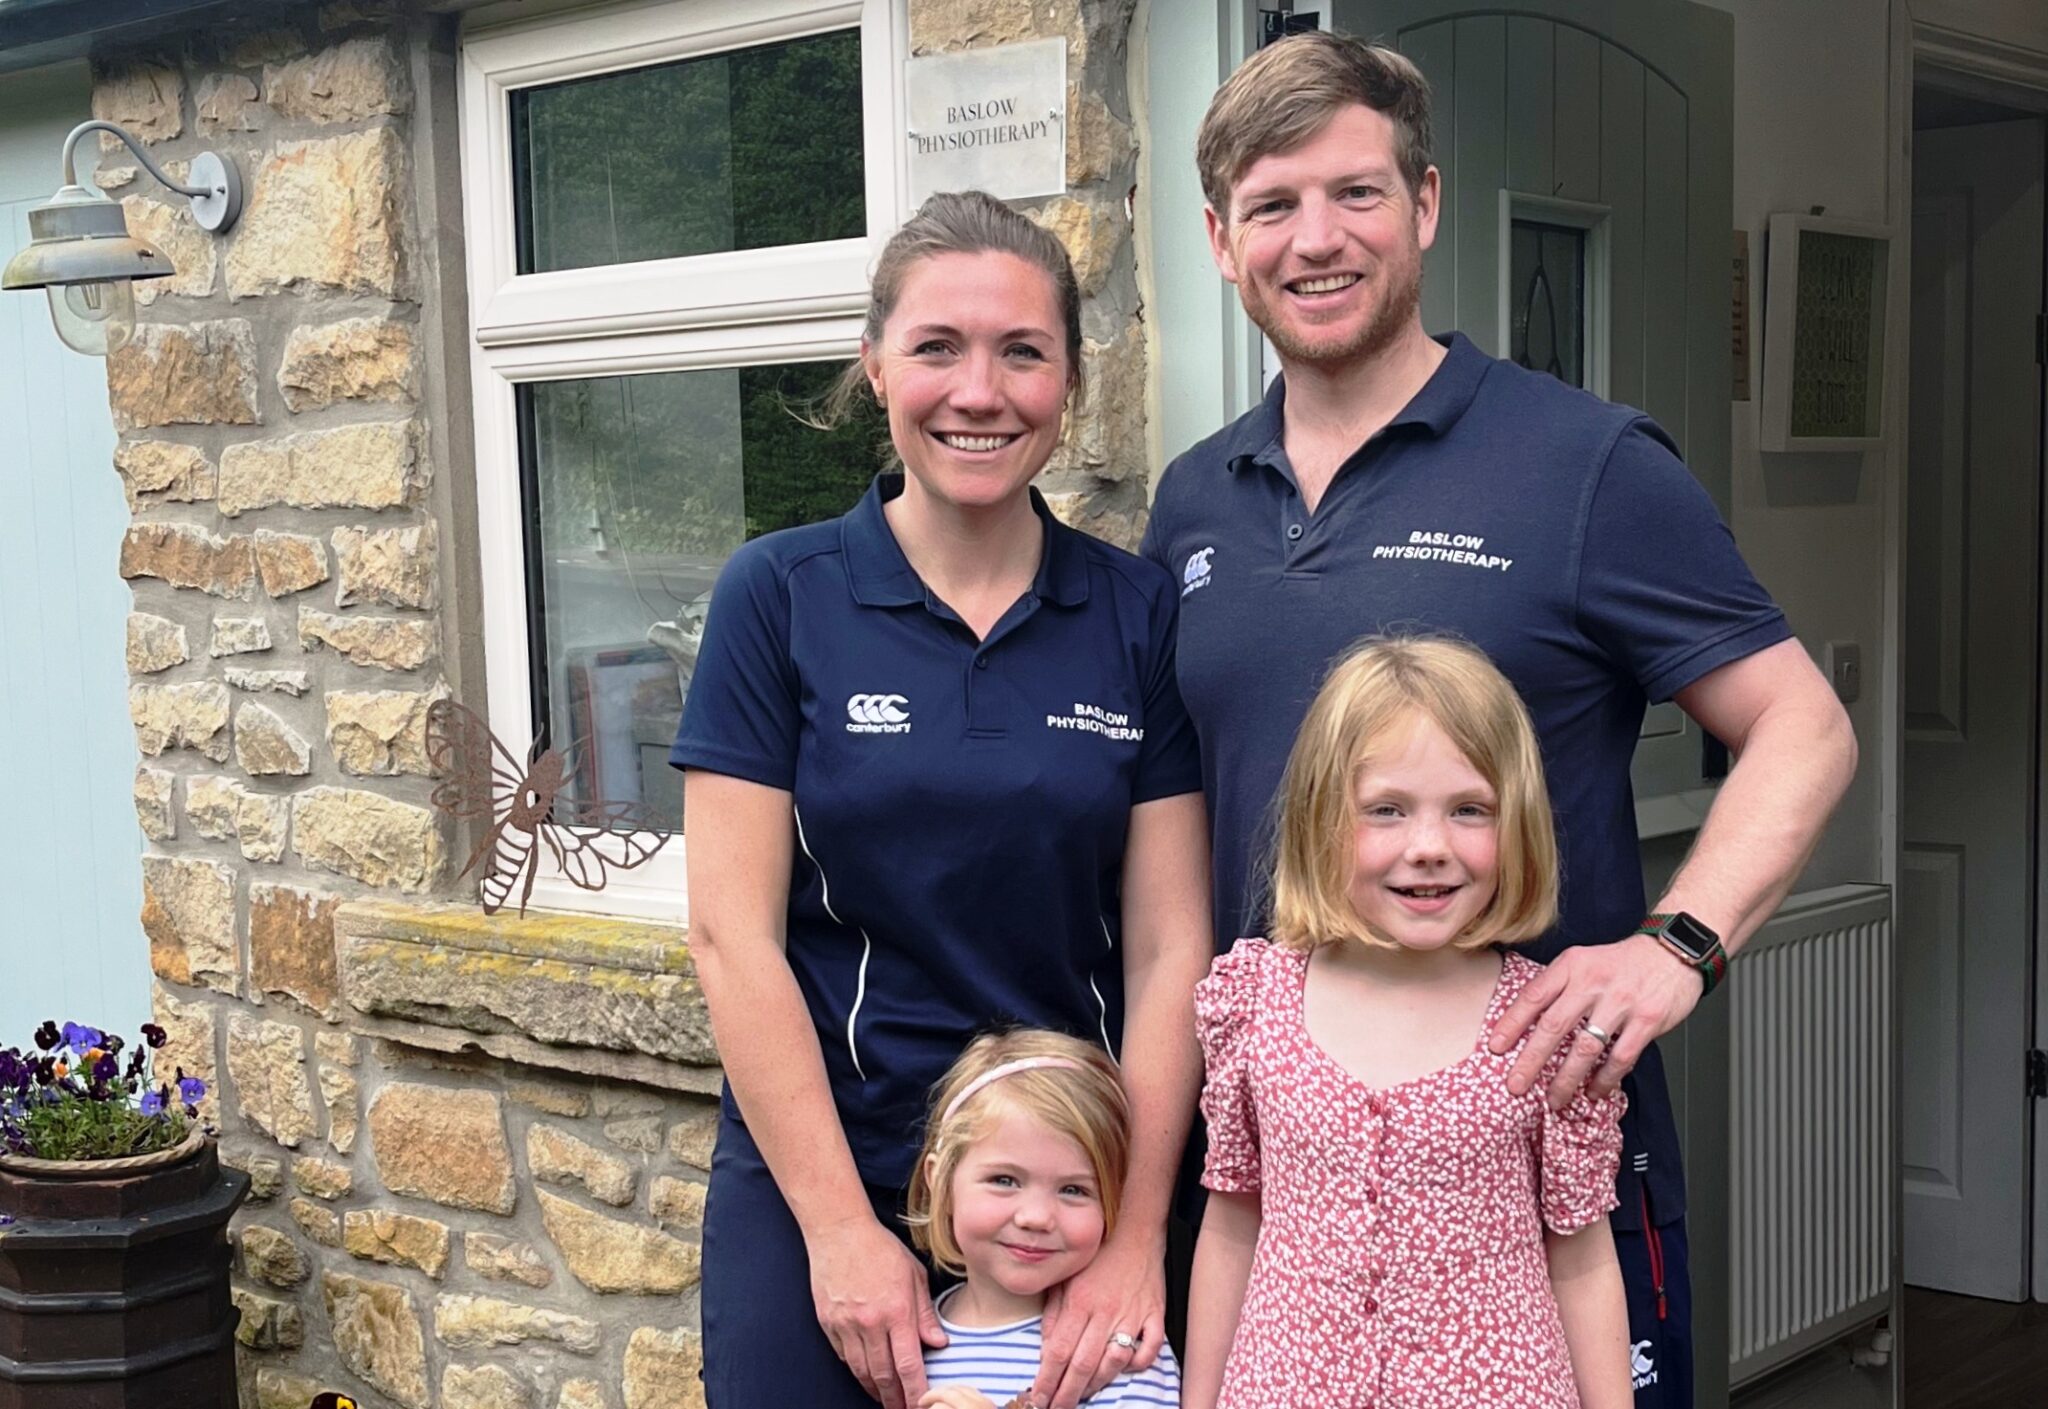 Sarah Titman & Guy Titman with their children outside Baslow Physiotherapy